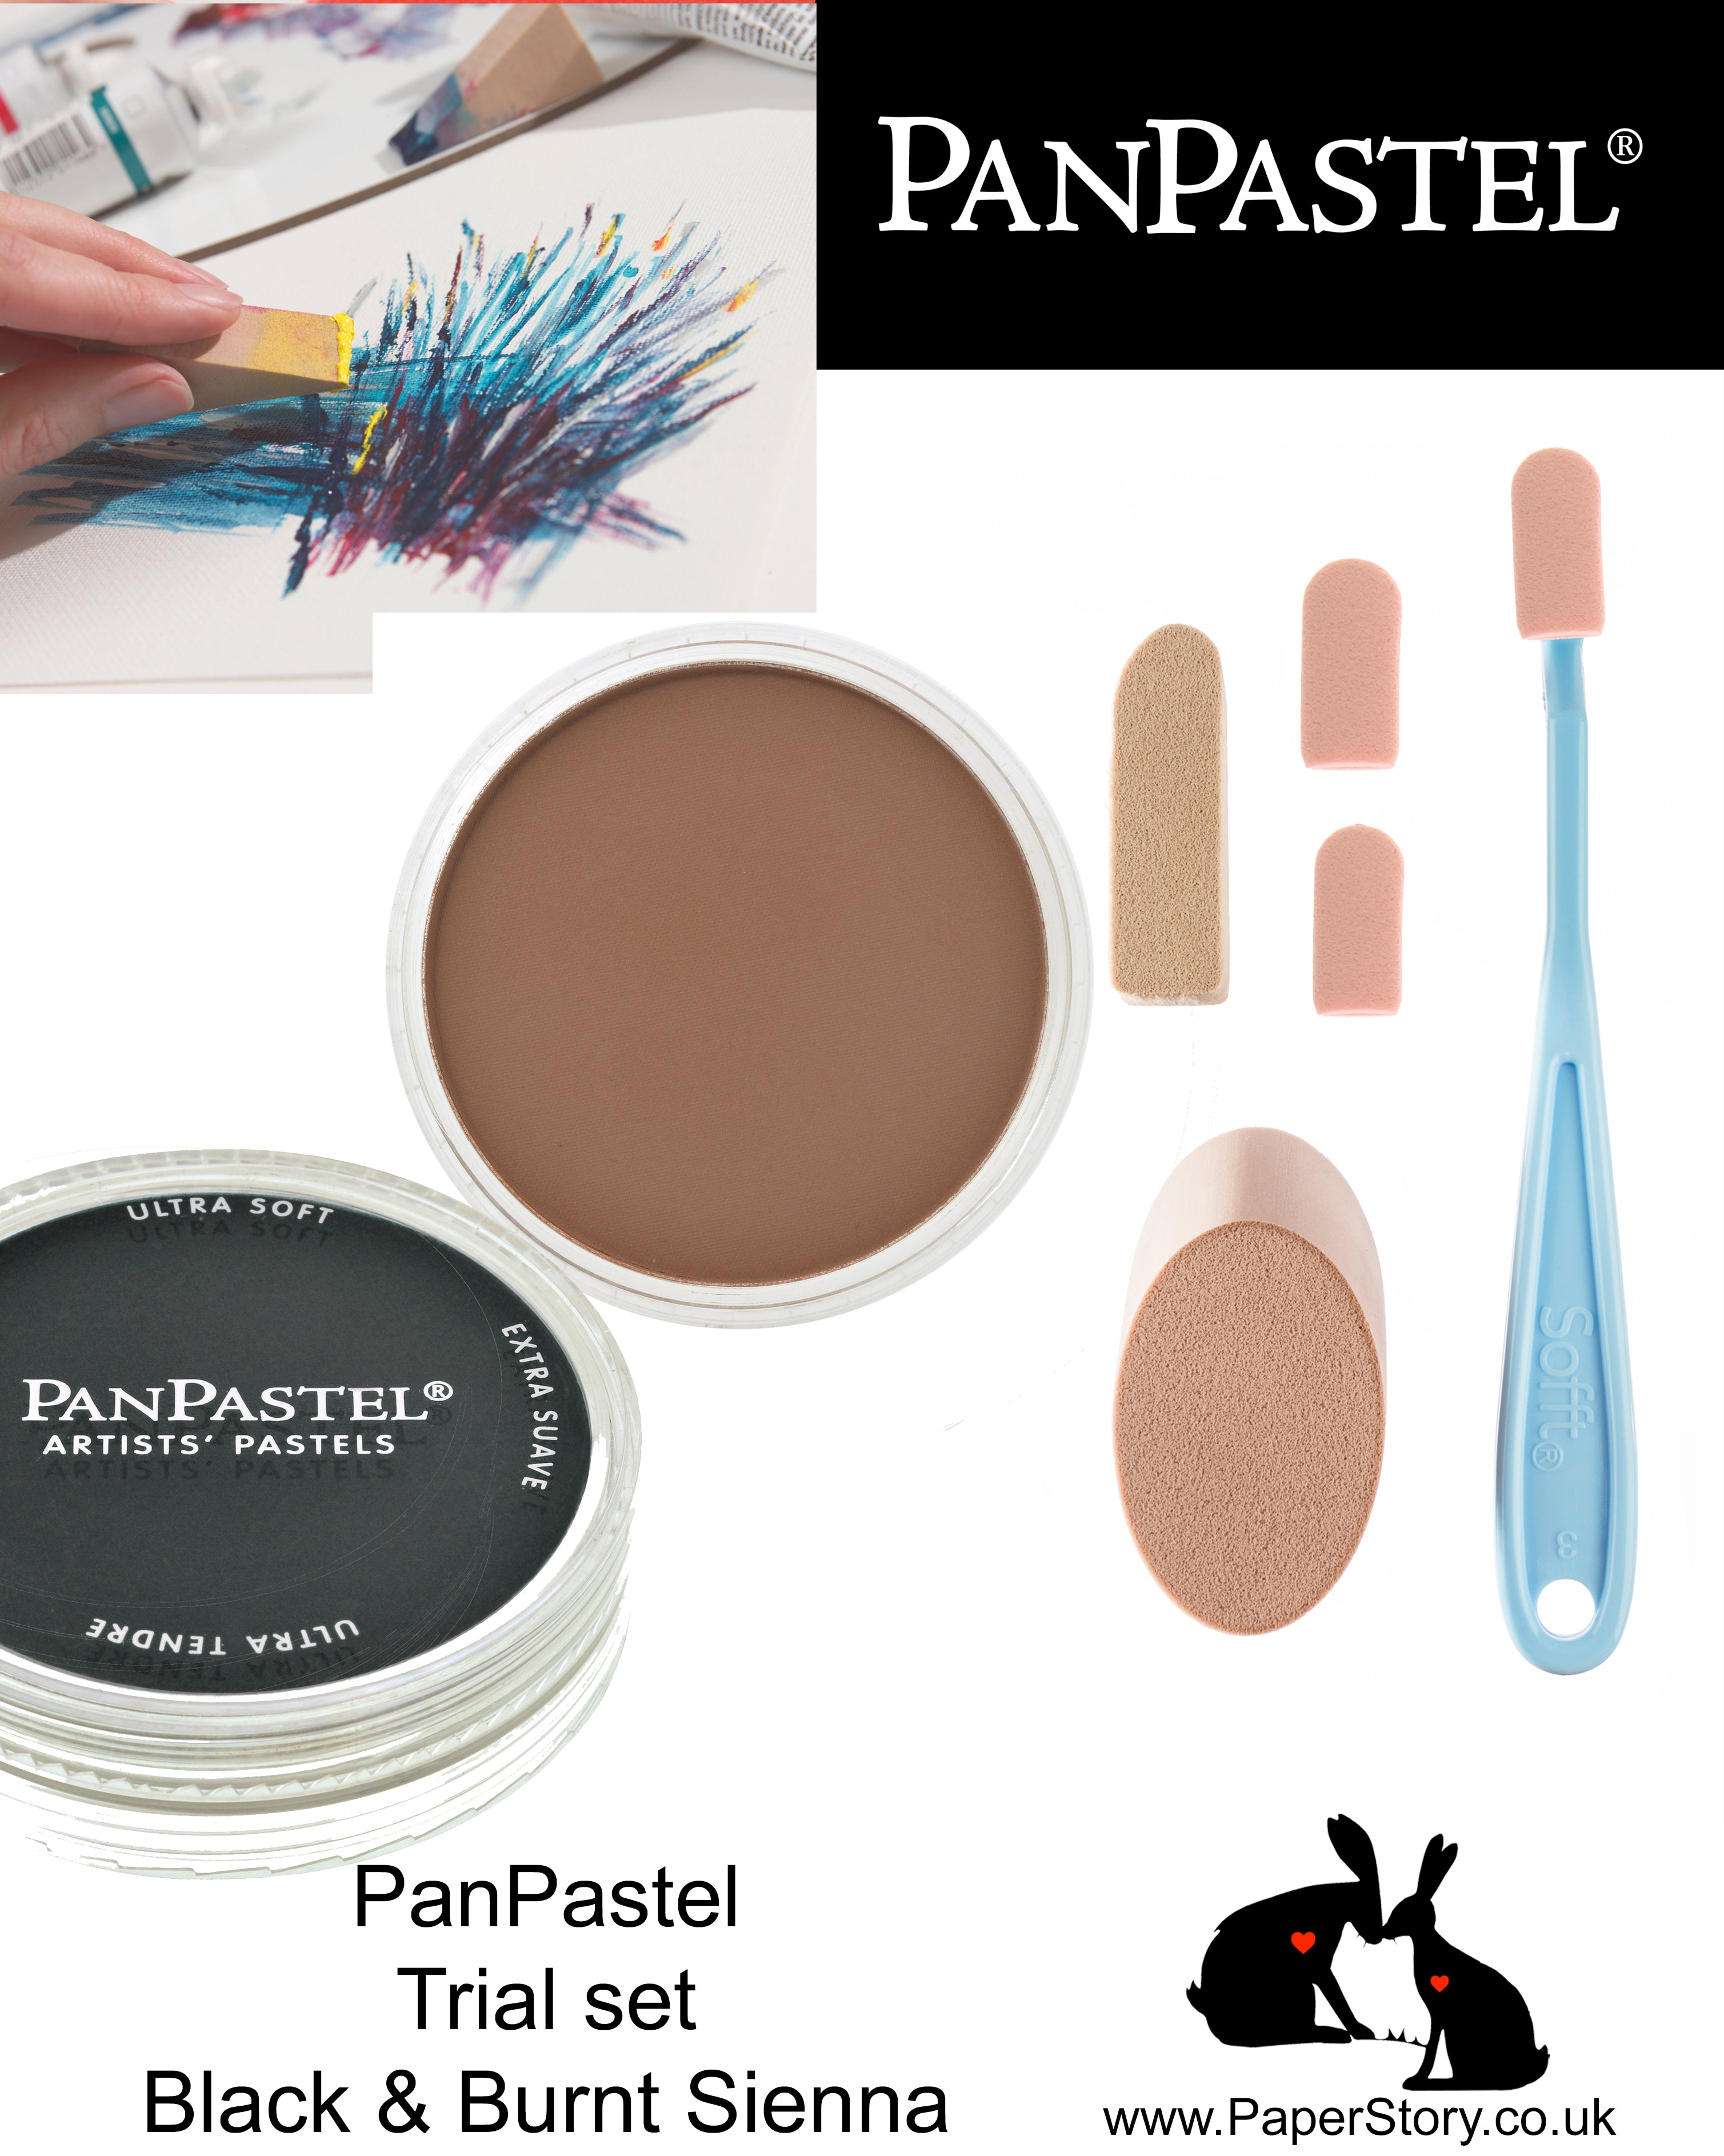 PanPastel 98021 trial tonal kit with Sofft tools Black & Burnt Sienna pans with a selection of Sofft tools. Perfect introduction to PanPastels. 